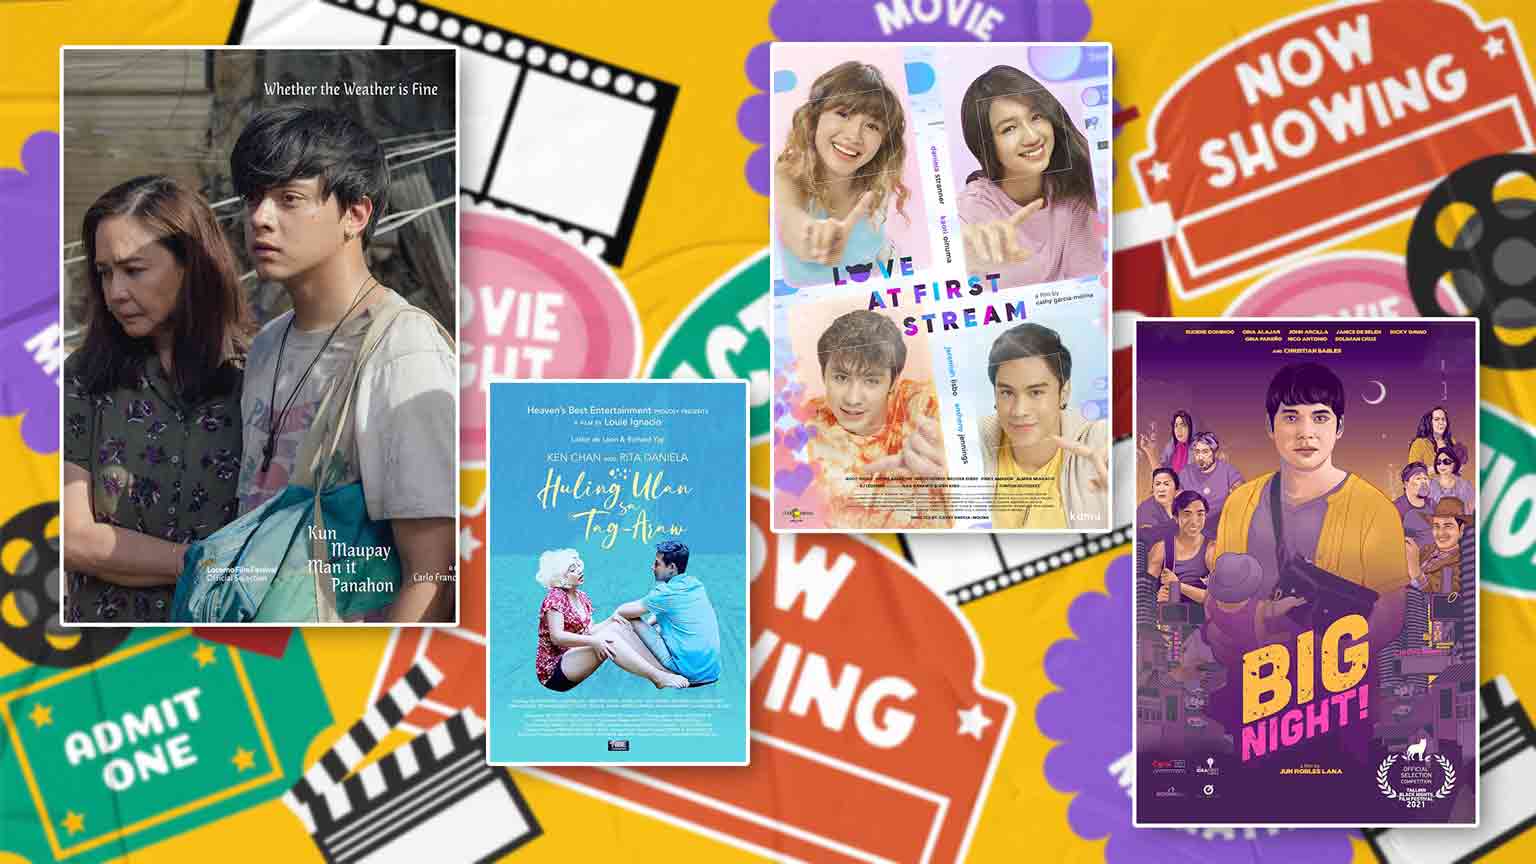 mmff 2021 movies